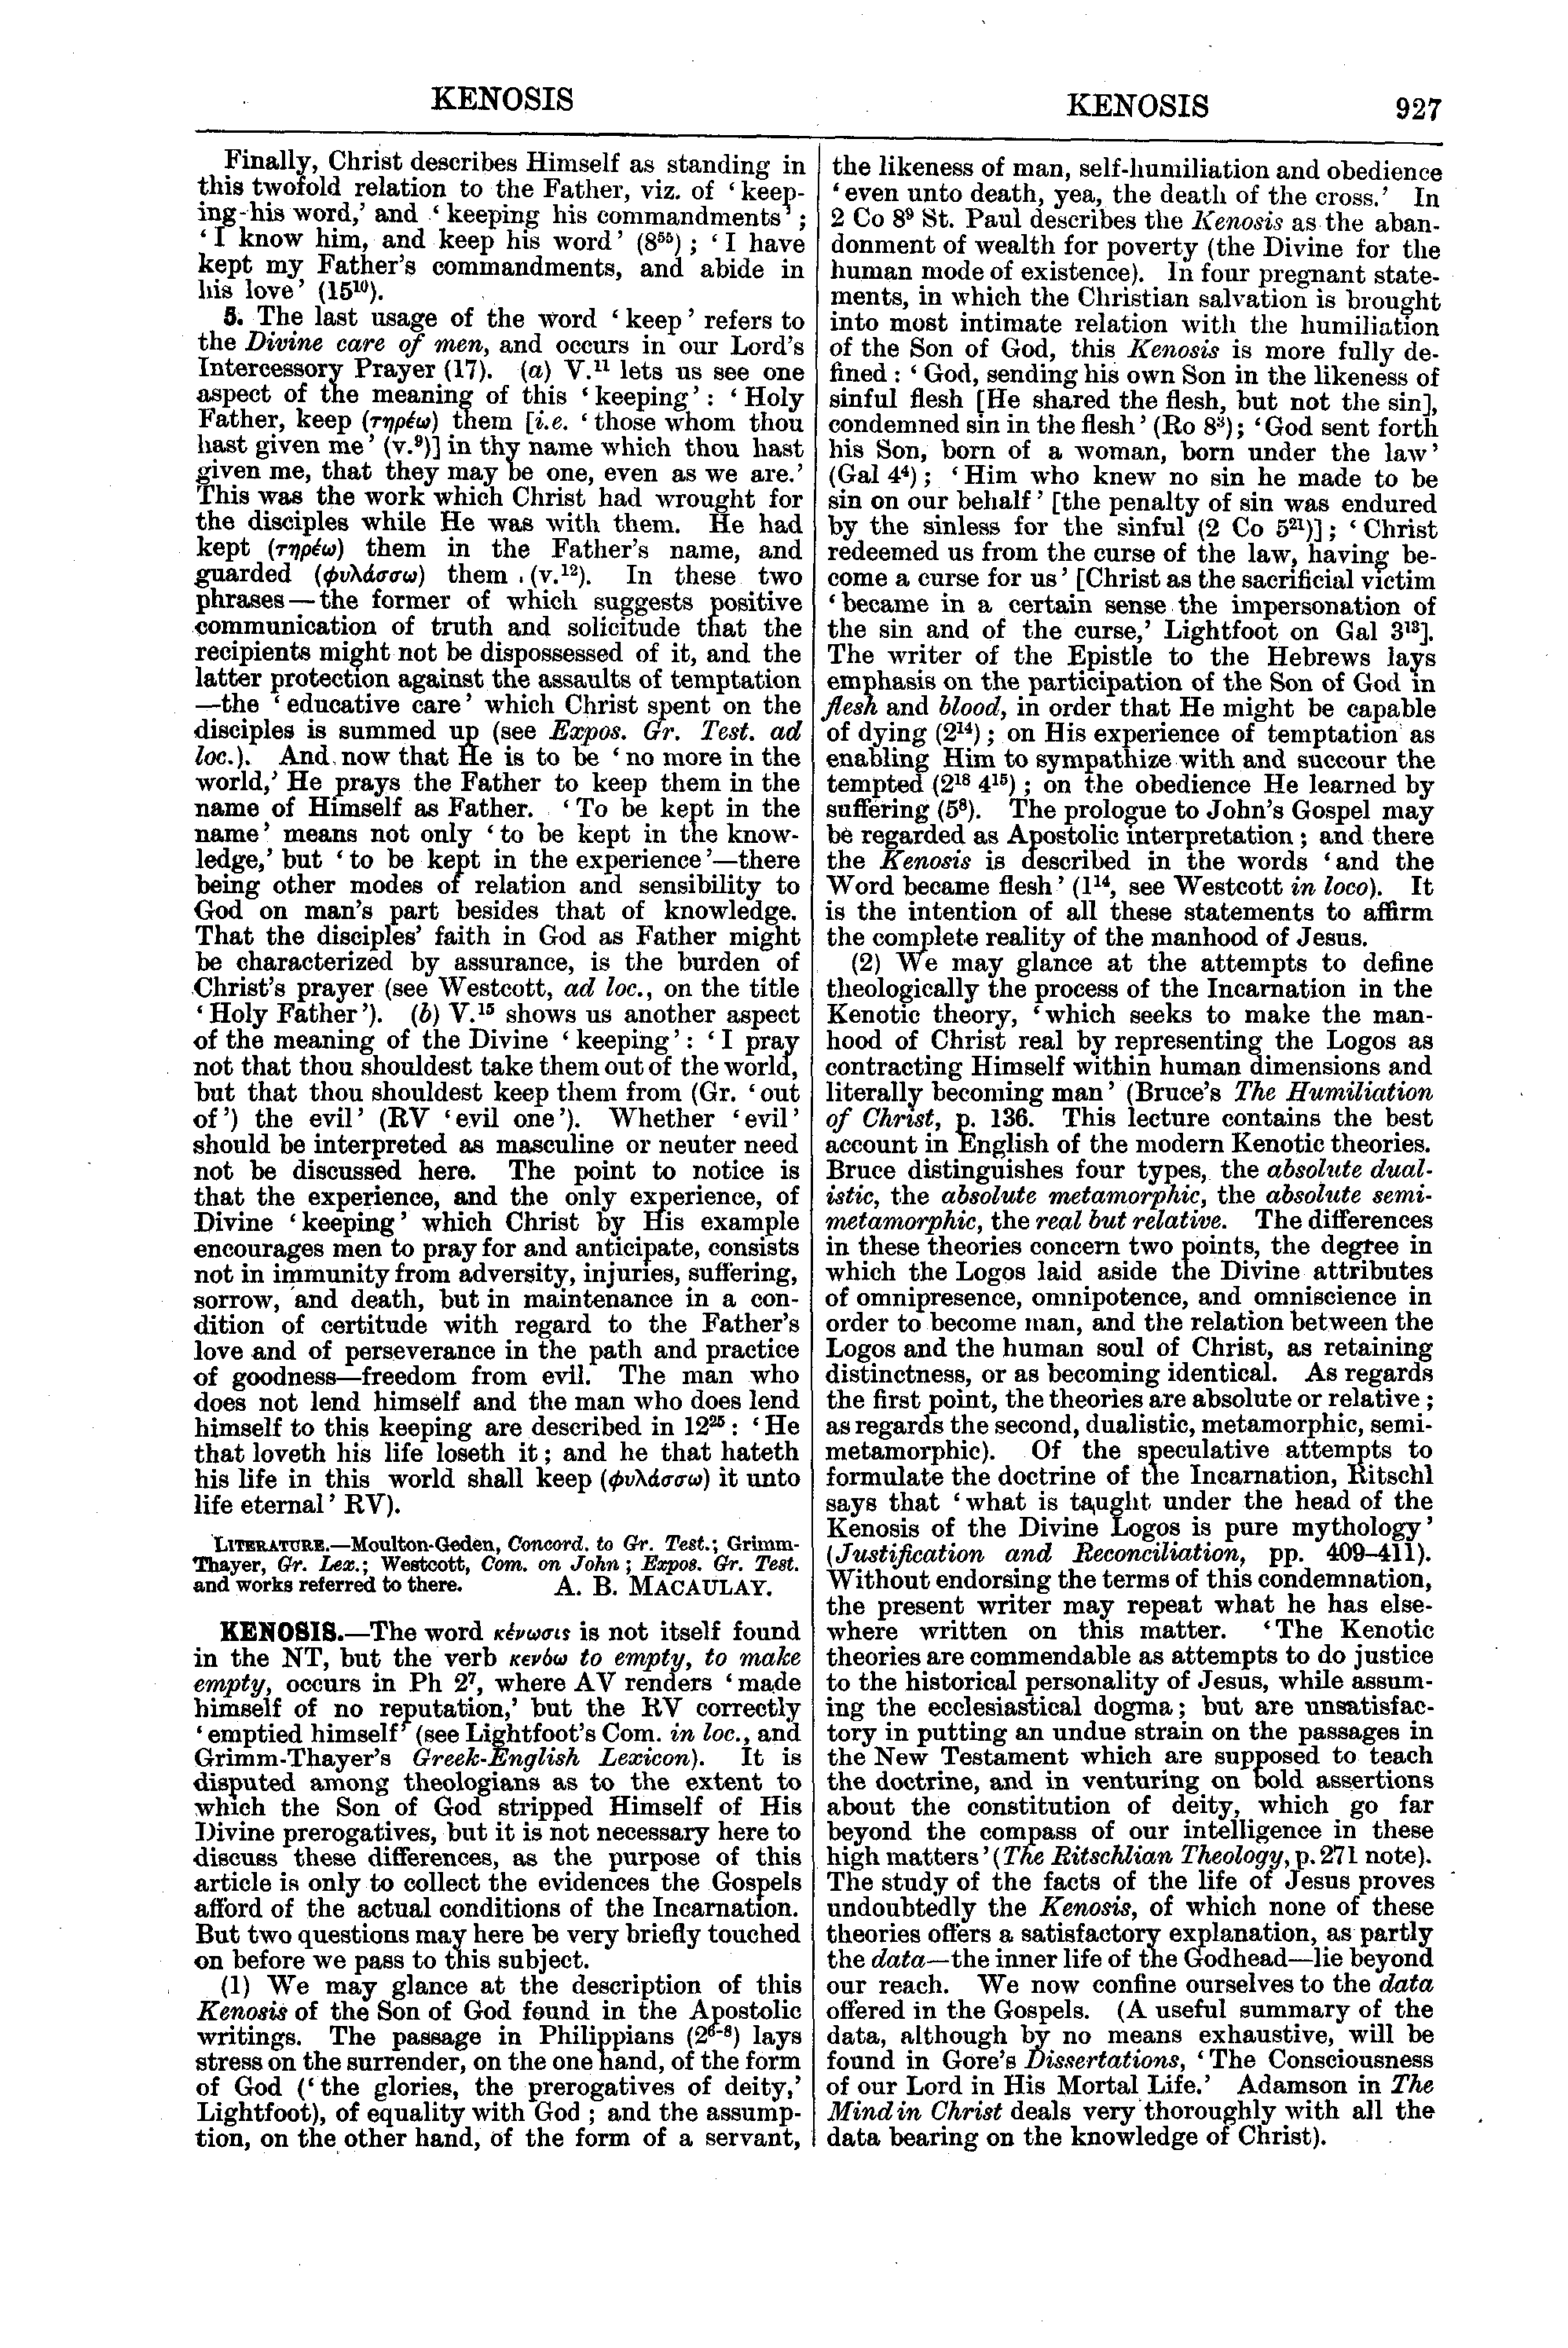 Image of page 927